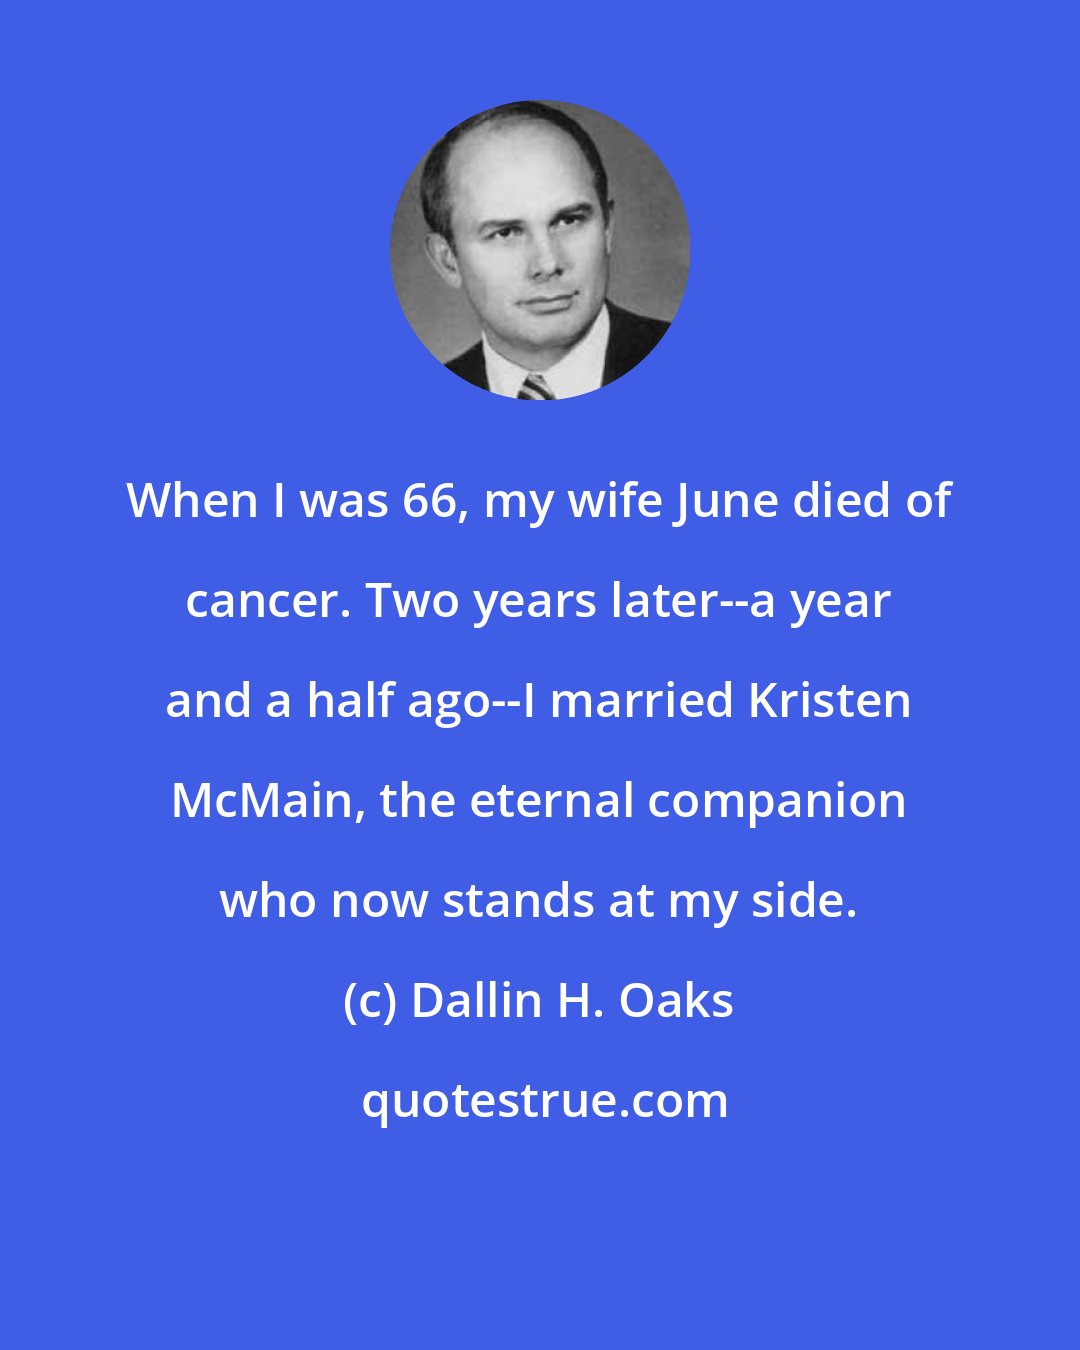 Dallin H. Oaks: When I was 66, my wife June died of cancer. Two years later--a year and a half ago--I married Kristen McMain, the eternal companion who now stands at my side.